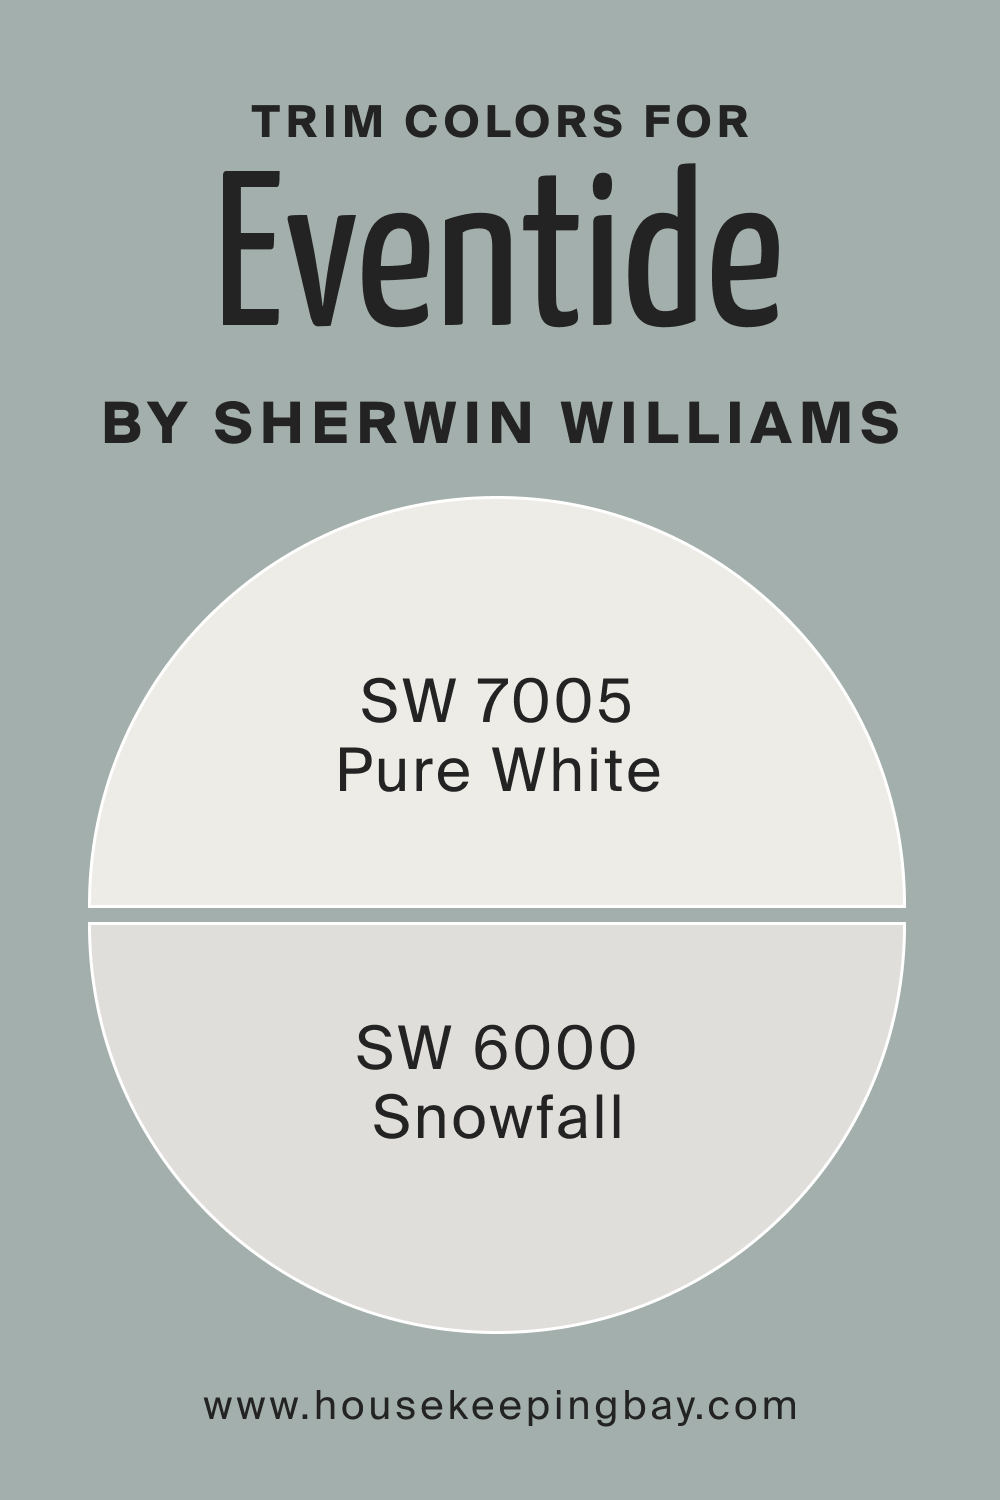 Trim Colors of SW 9643 Eventide by Sherwin Williams